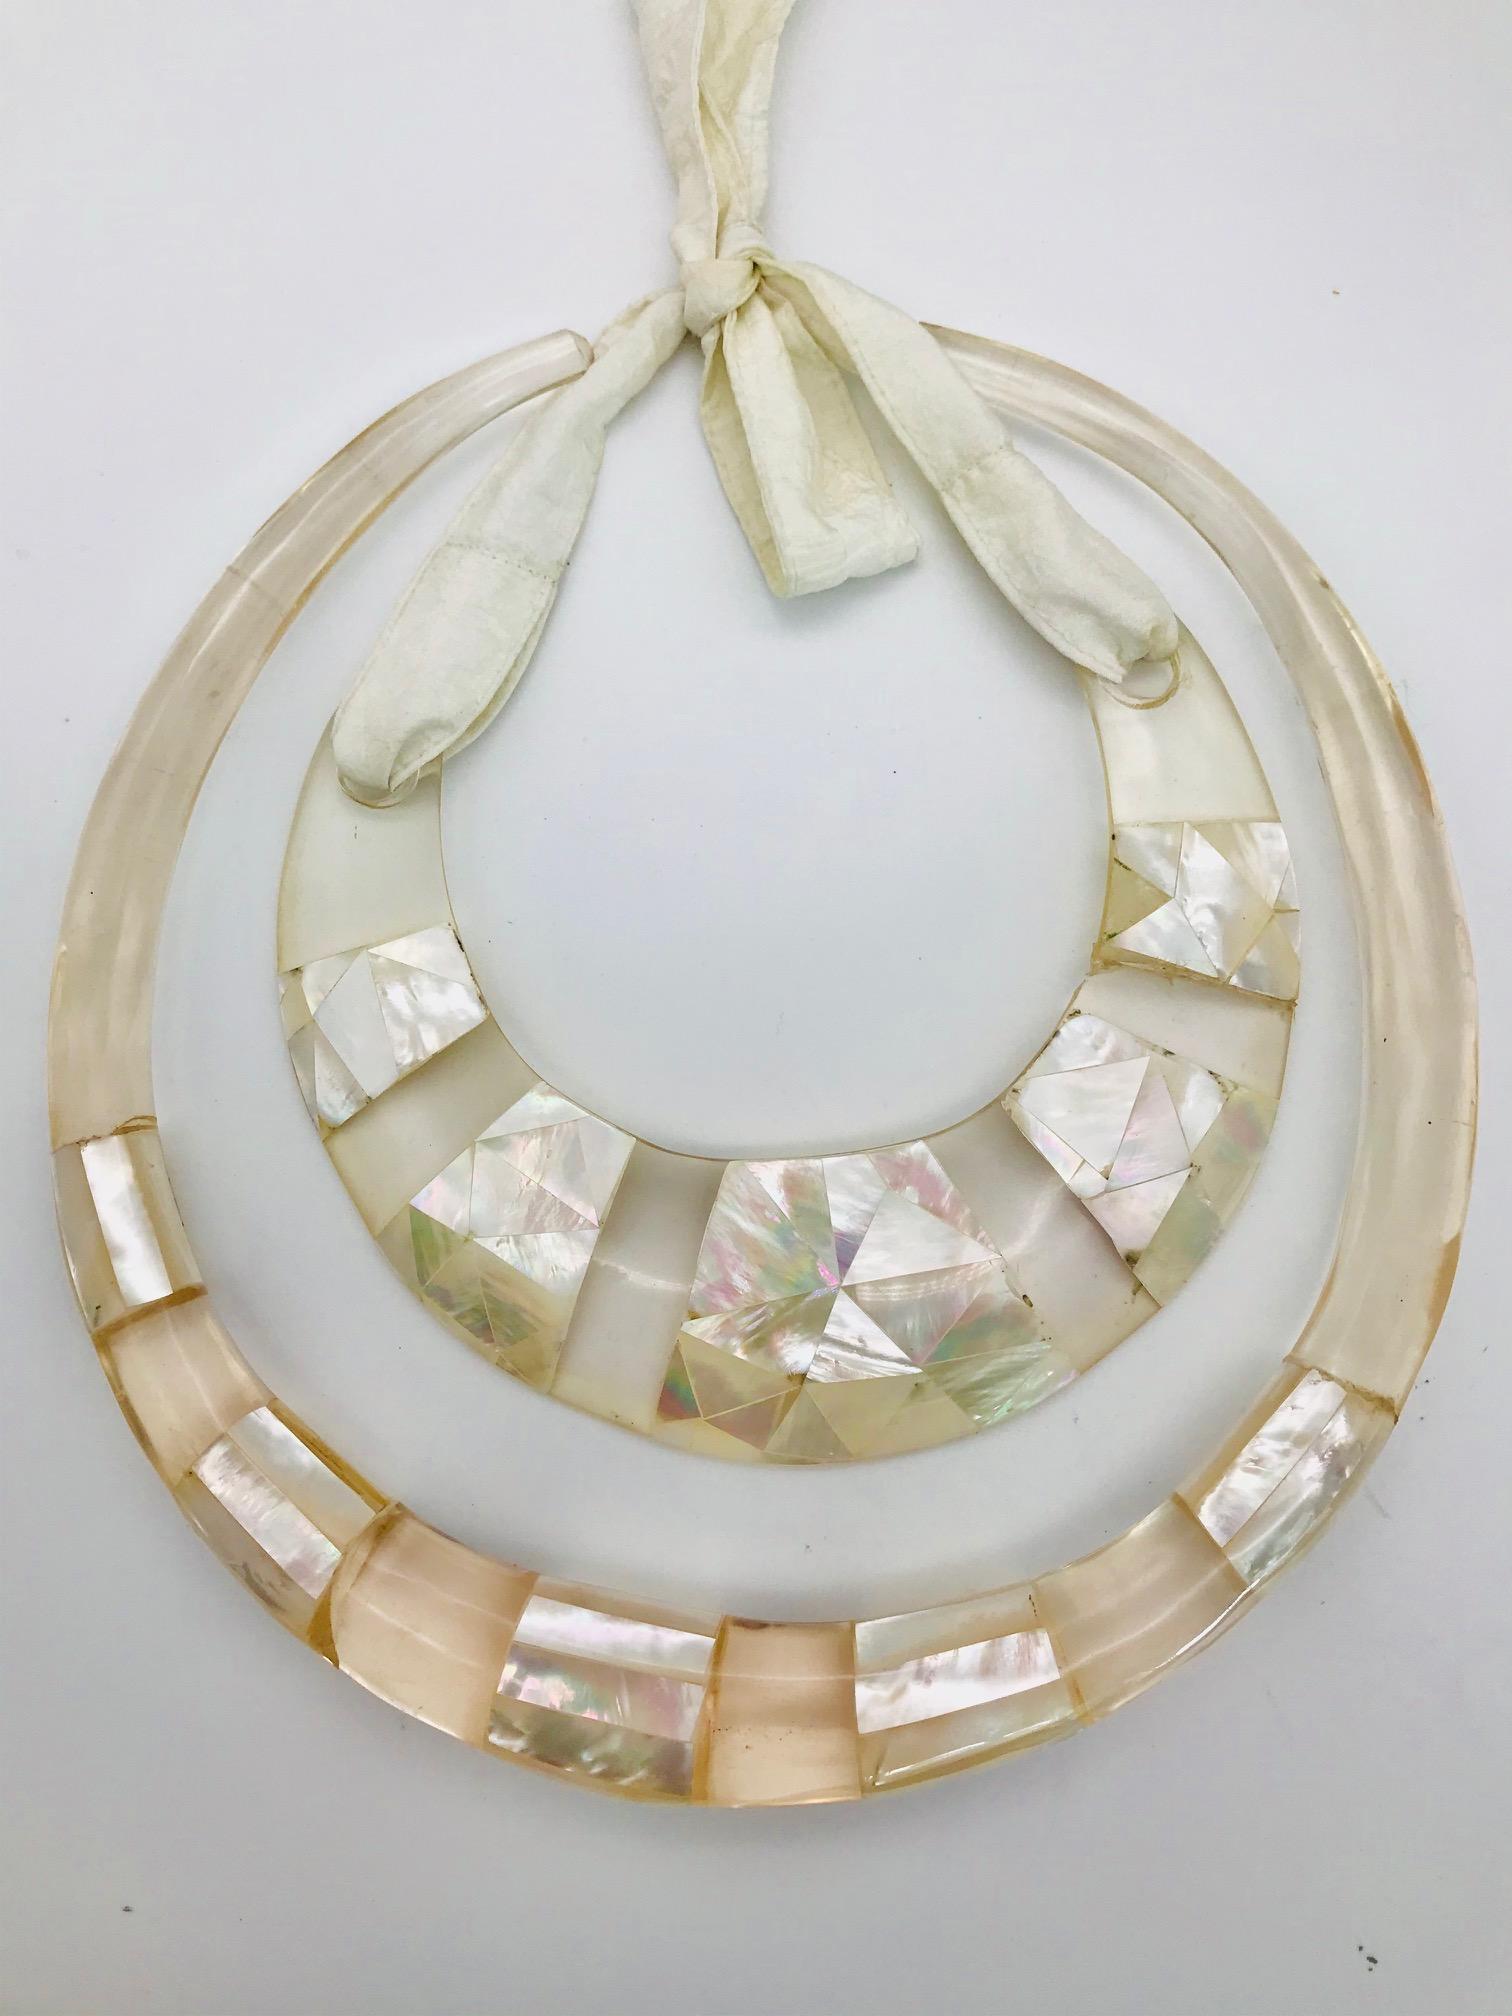 The 2 white Mother of Pearl Statement Necklaces are made  from eco -luxe Materials . Iridescent white mother of pearl and Lucite are a very unique and  creative combination. The design was created in collaboration with my daughter Gaella  Gottwald,